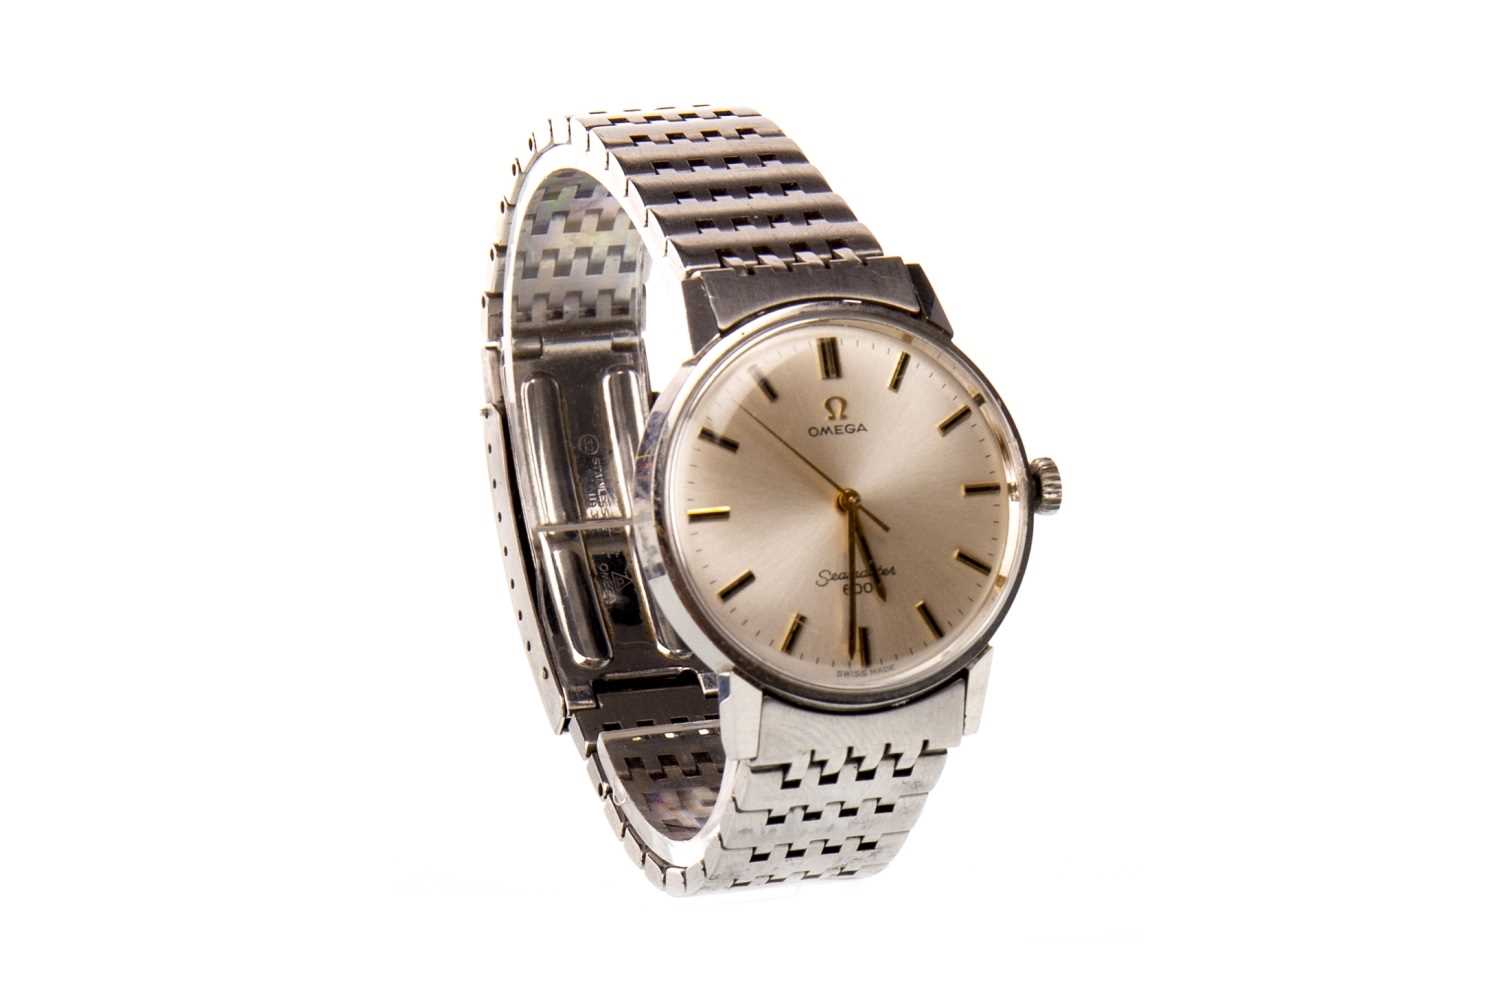 Lot 870 - A GENTLEMAN'S OMEGA SEAMASTER 600 STAINLESS WATCH